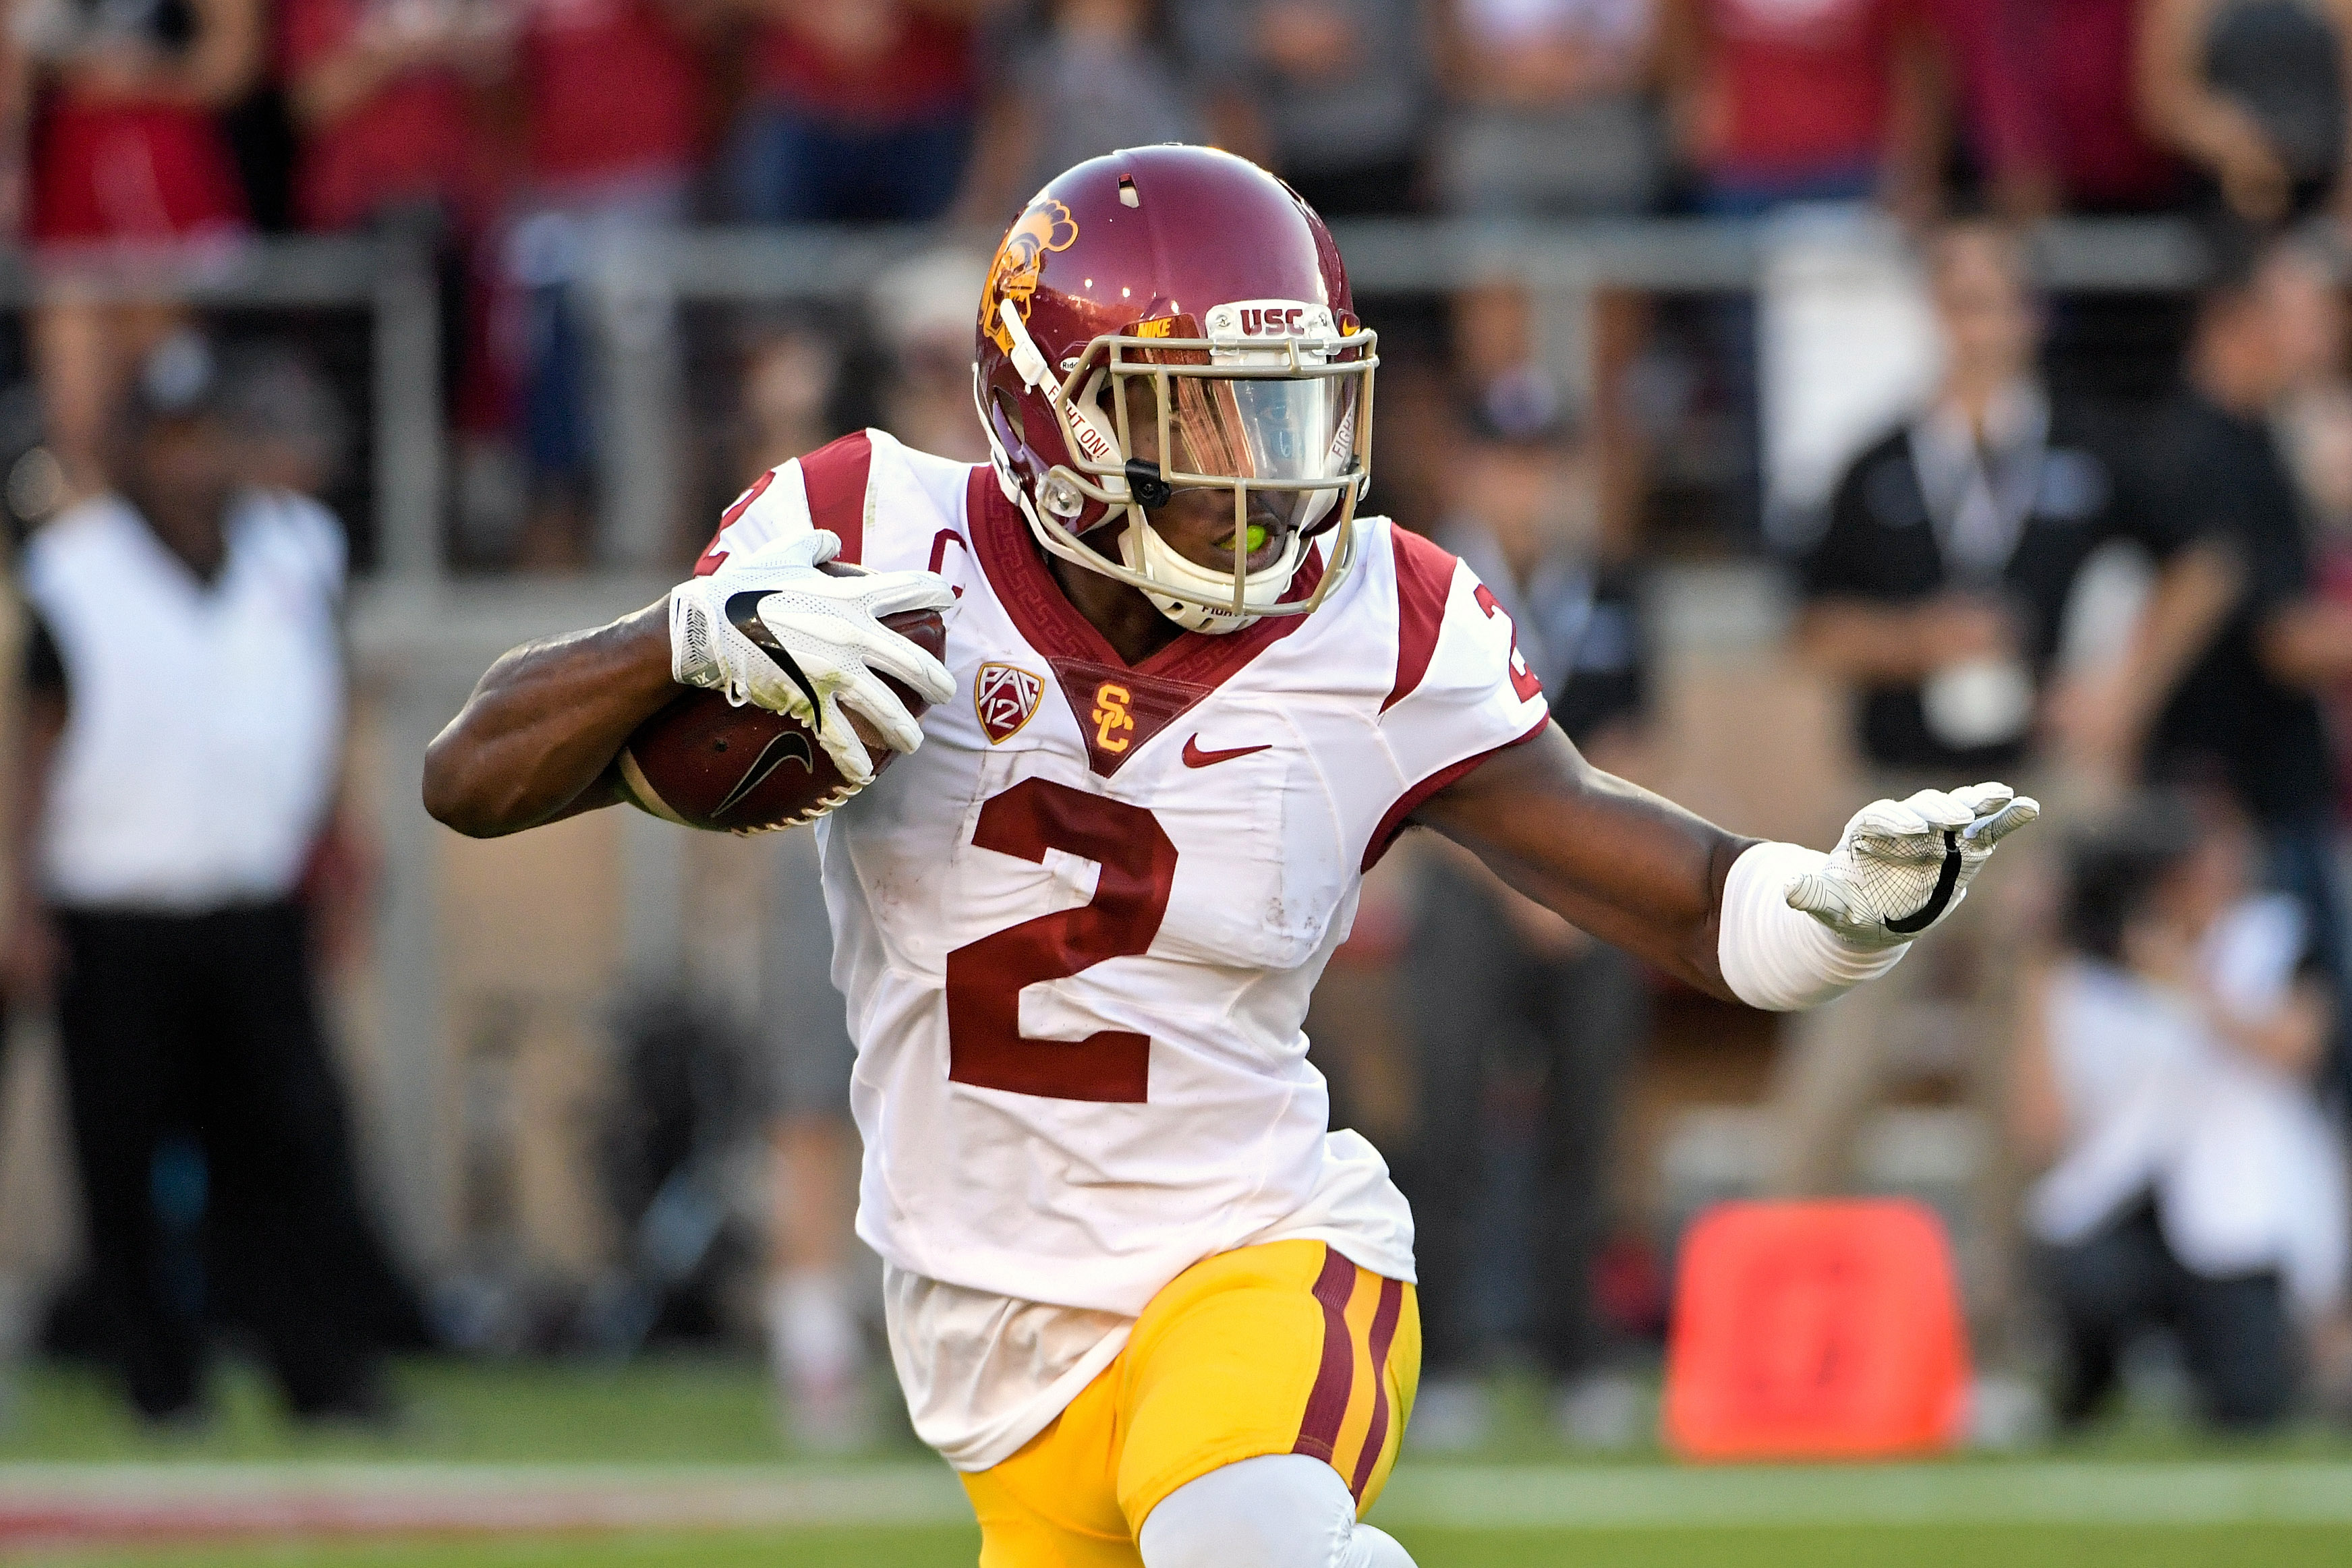 Adoree' Jackson's 12 Best Moments as a USC Football Player